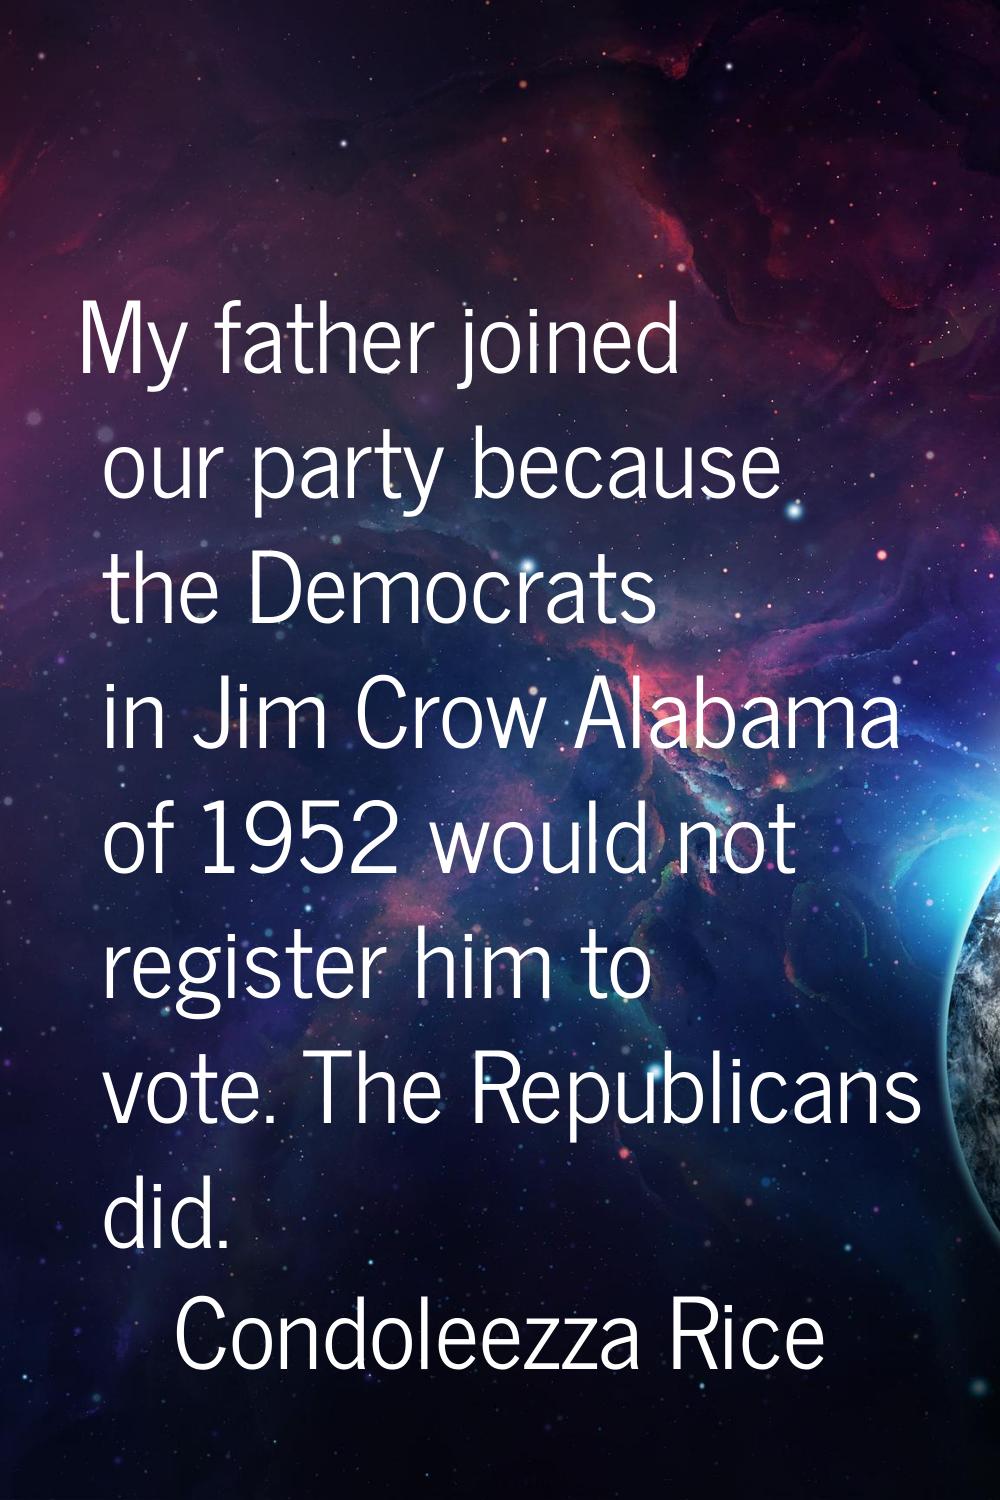 My father joined our party because the Democrats in Jim Crow Alabama of 1952 would not register him